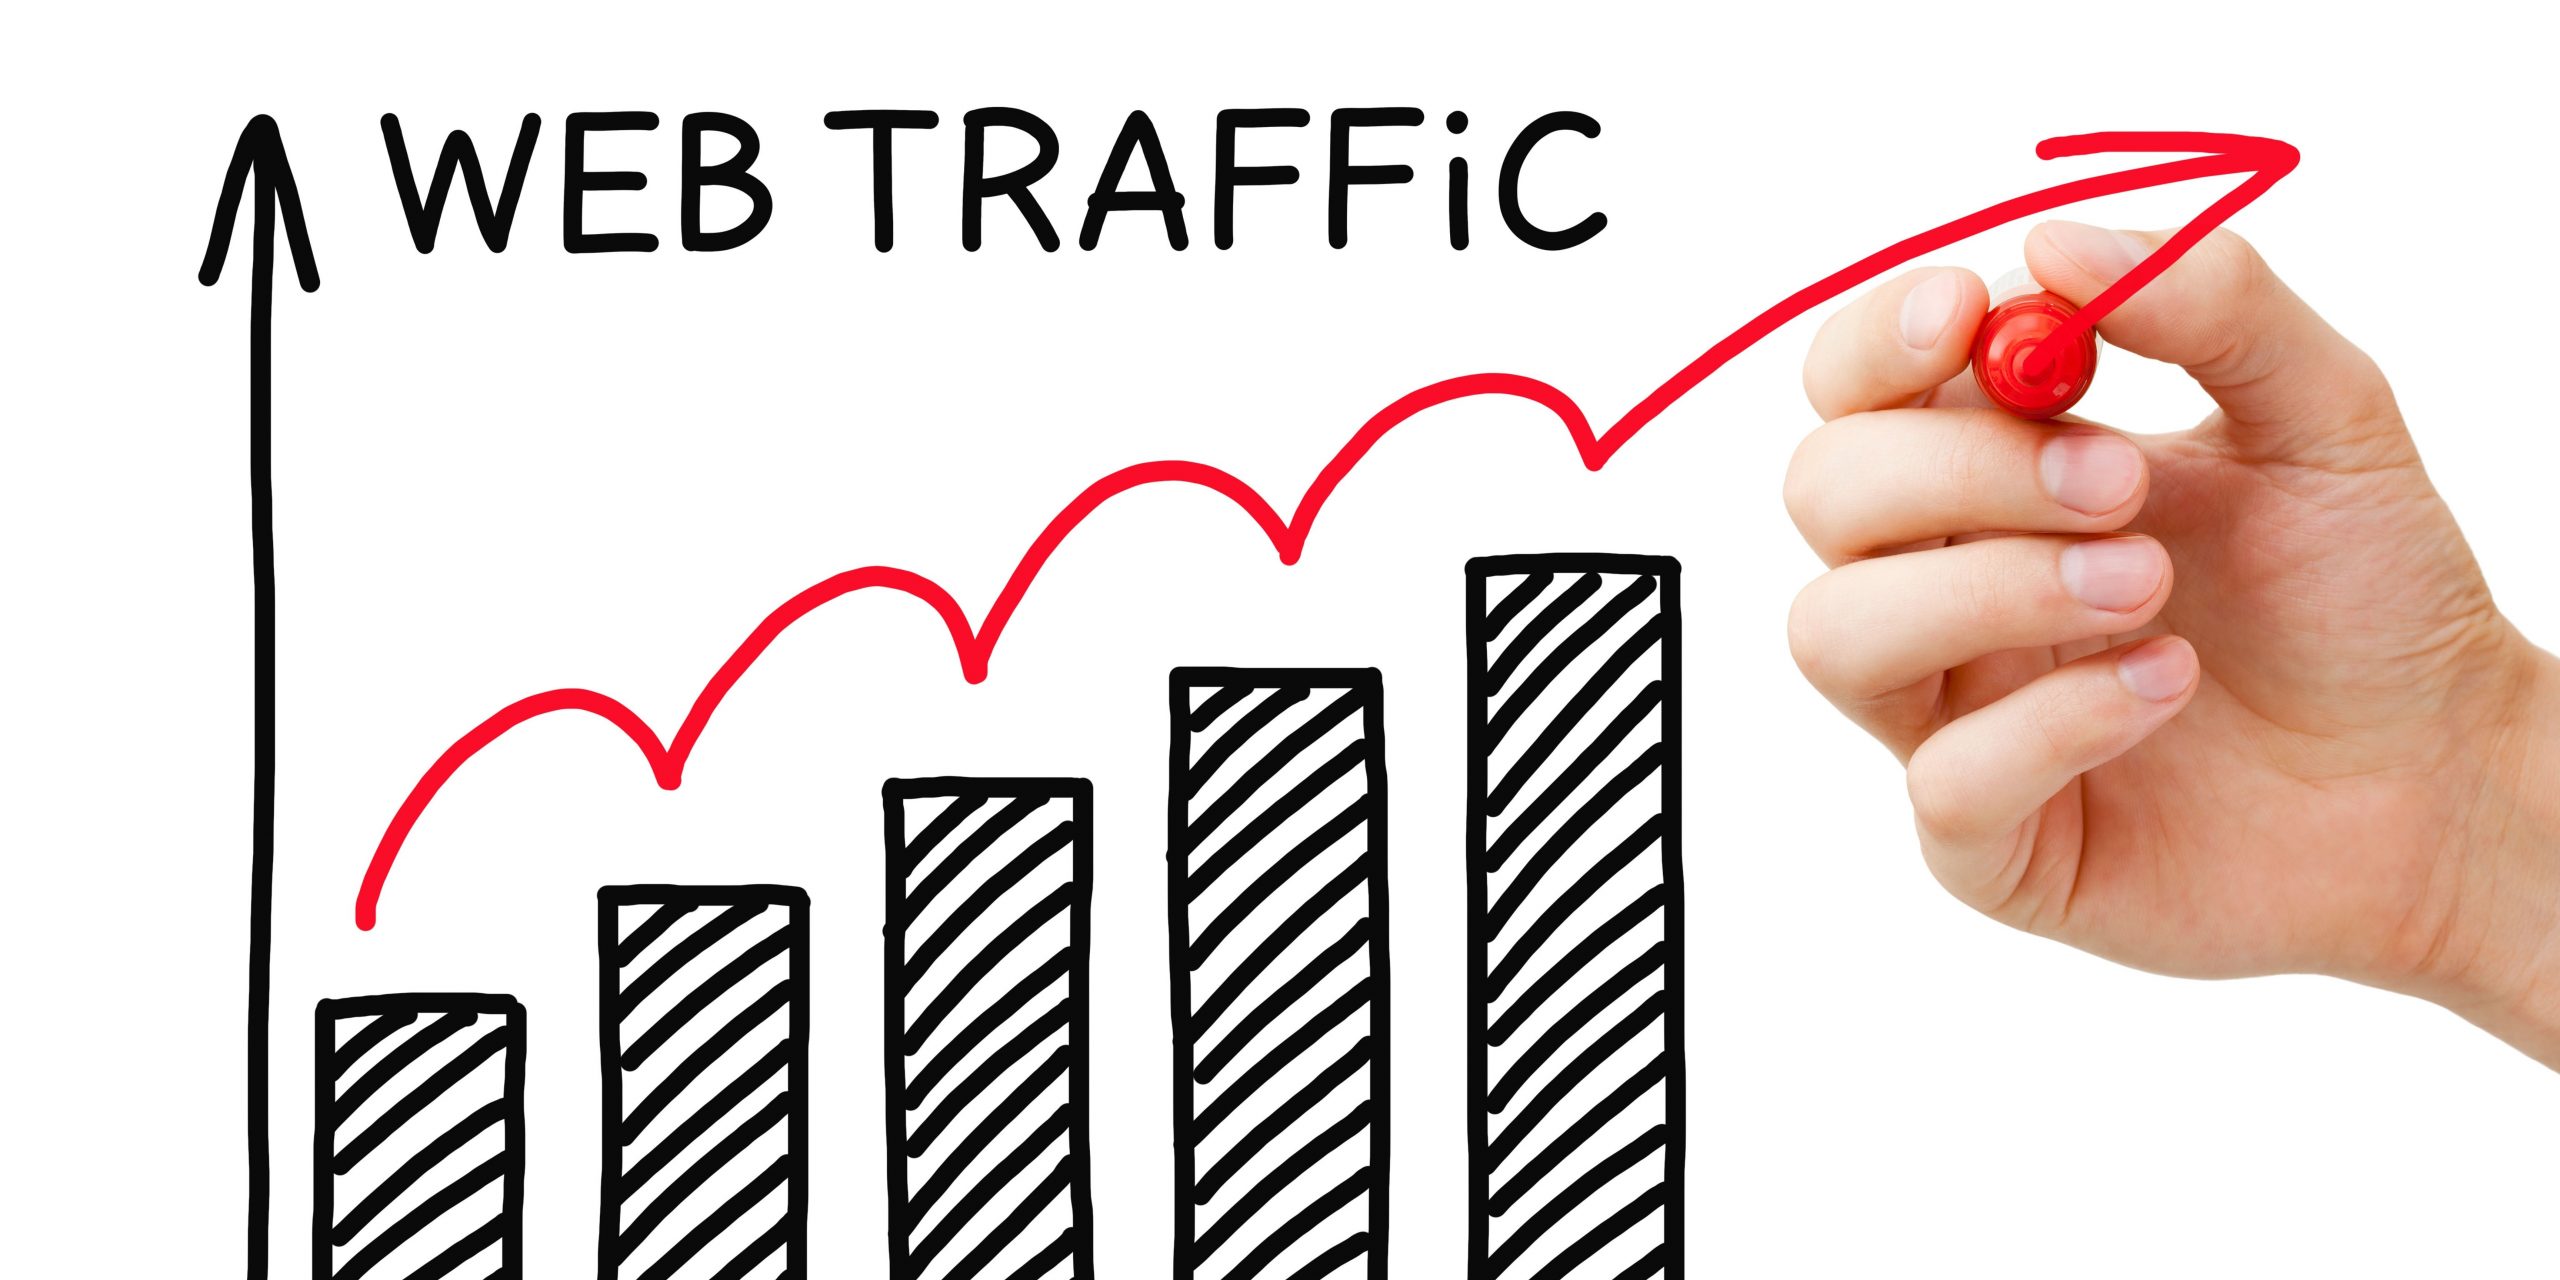 How are you going to increase the traffic on your website